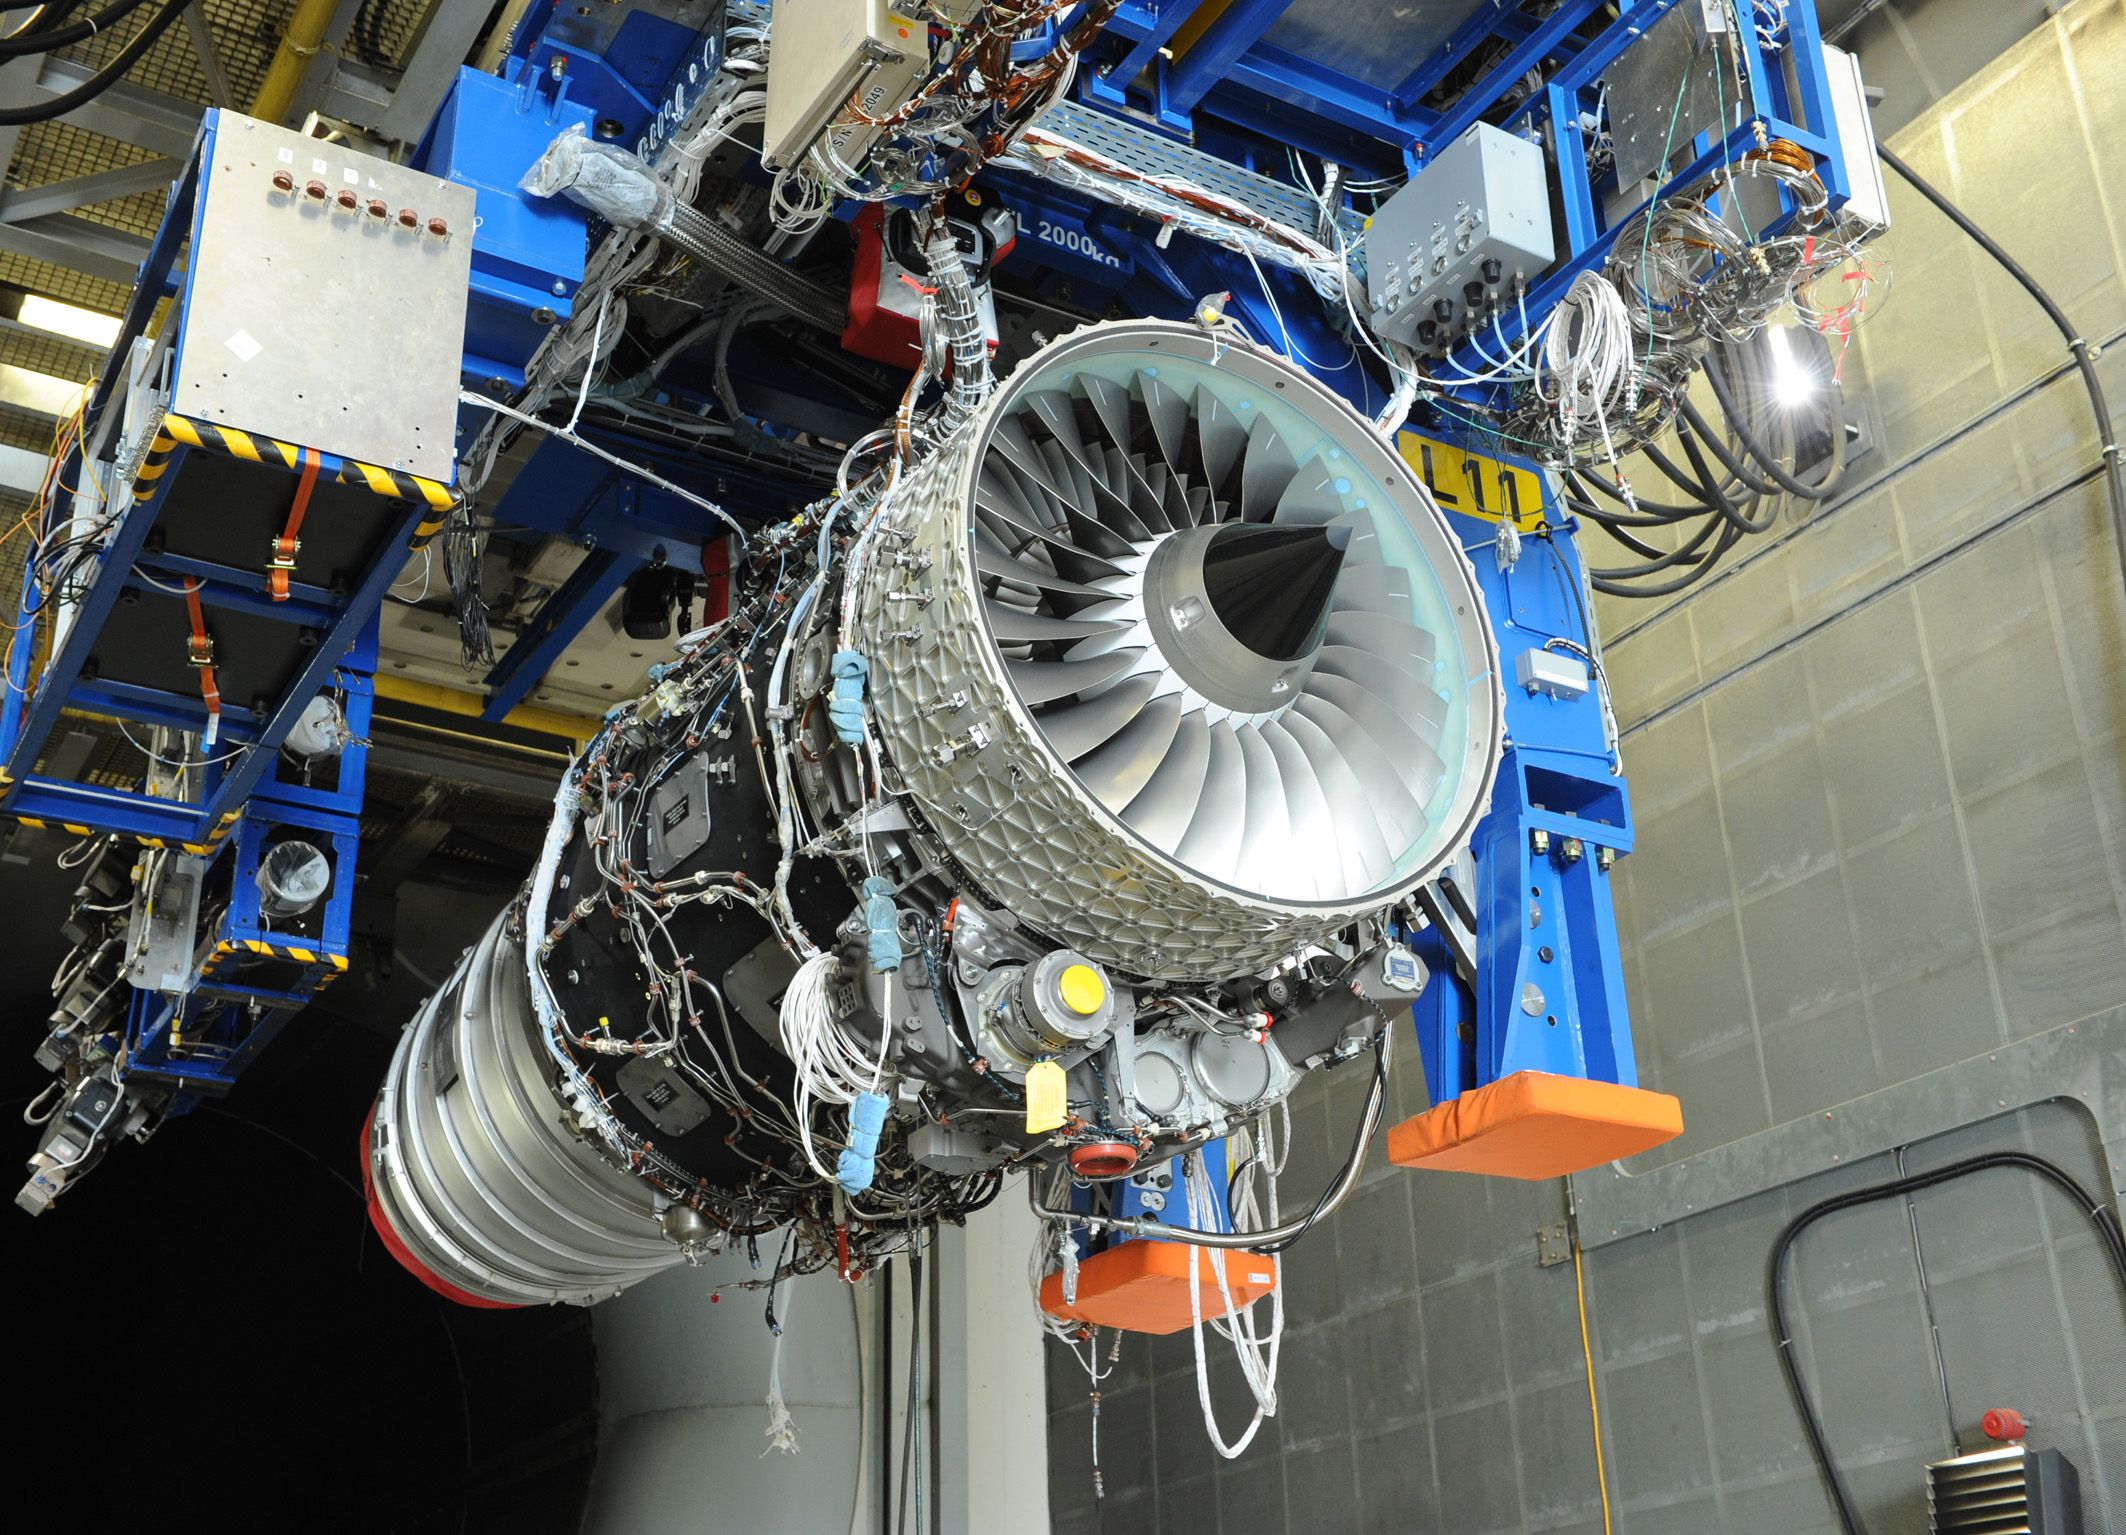 A Rolls Royce Pearl 15 engine on a test stand.